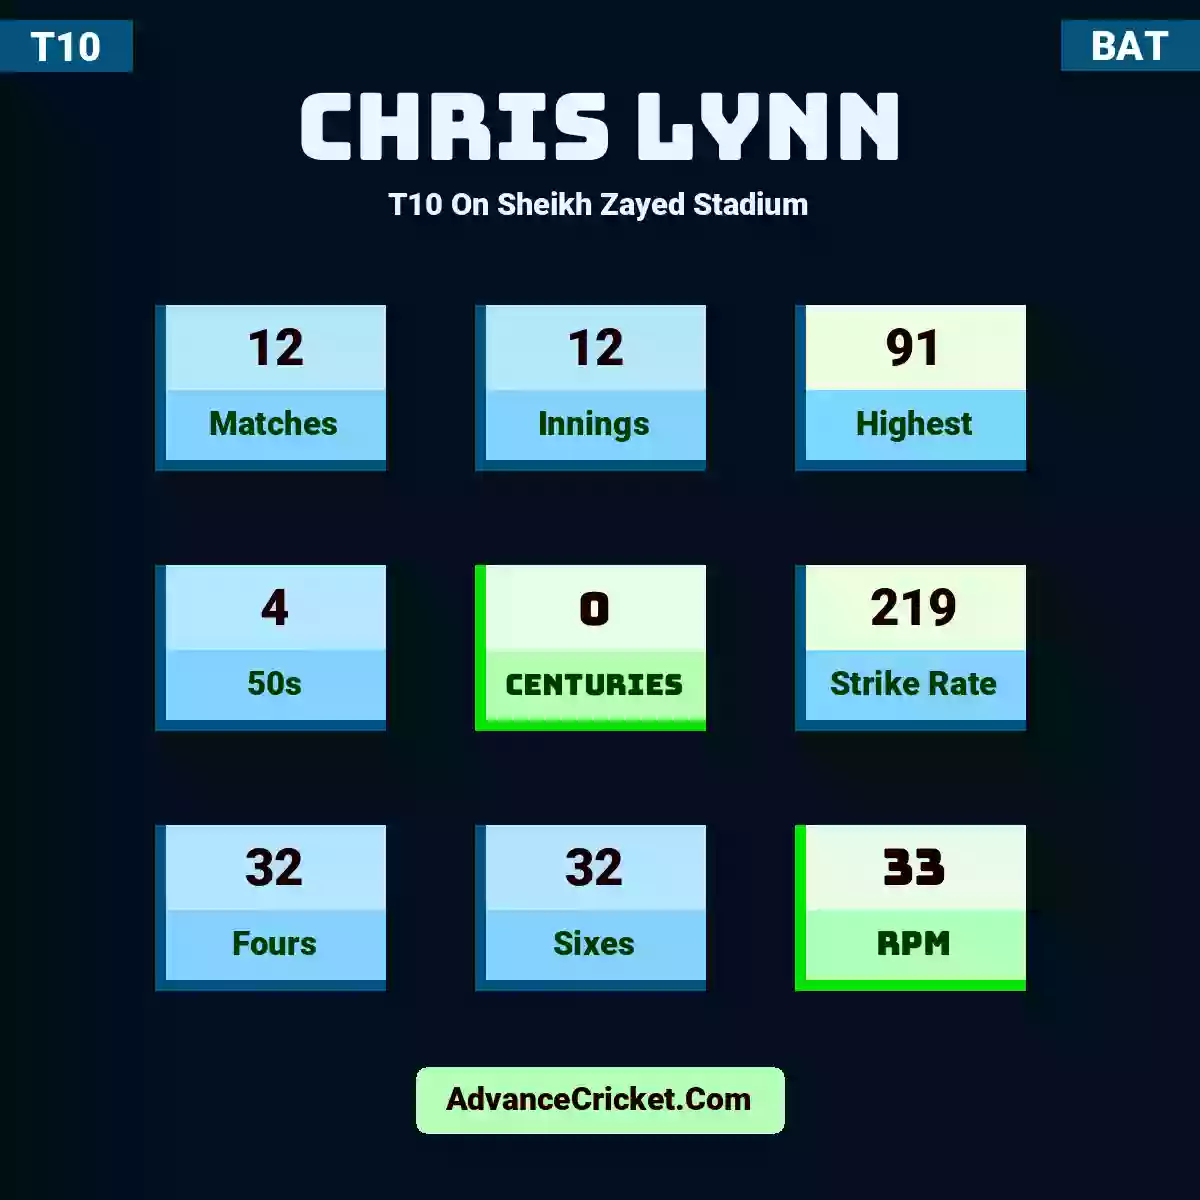 Chris Lynn T10  On Sheikh Zayed Stadium, Chris Lynn played 12 matches, scored 91 runs as highest, 4 half-centuries, and 0 centuries, with a strike rate of 219. C.Lynn hit 32 fours and 32 sixes, with an RPM of 33.